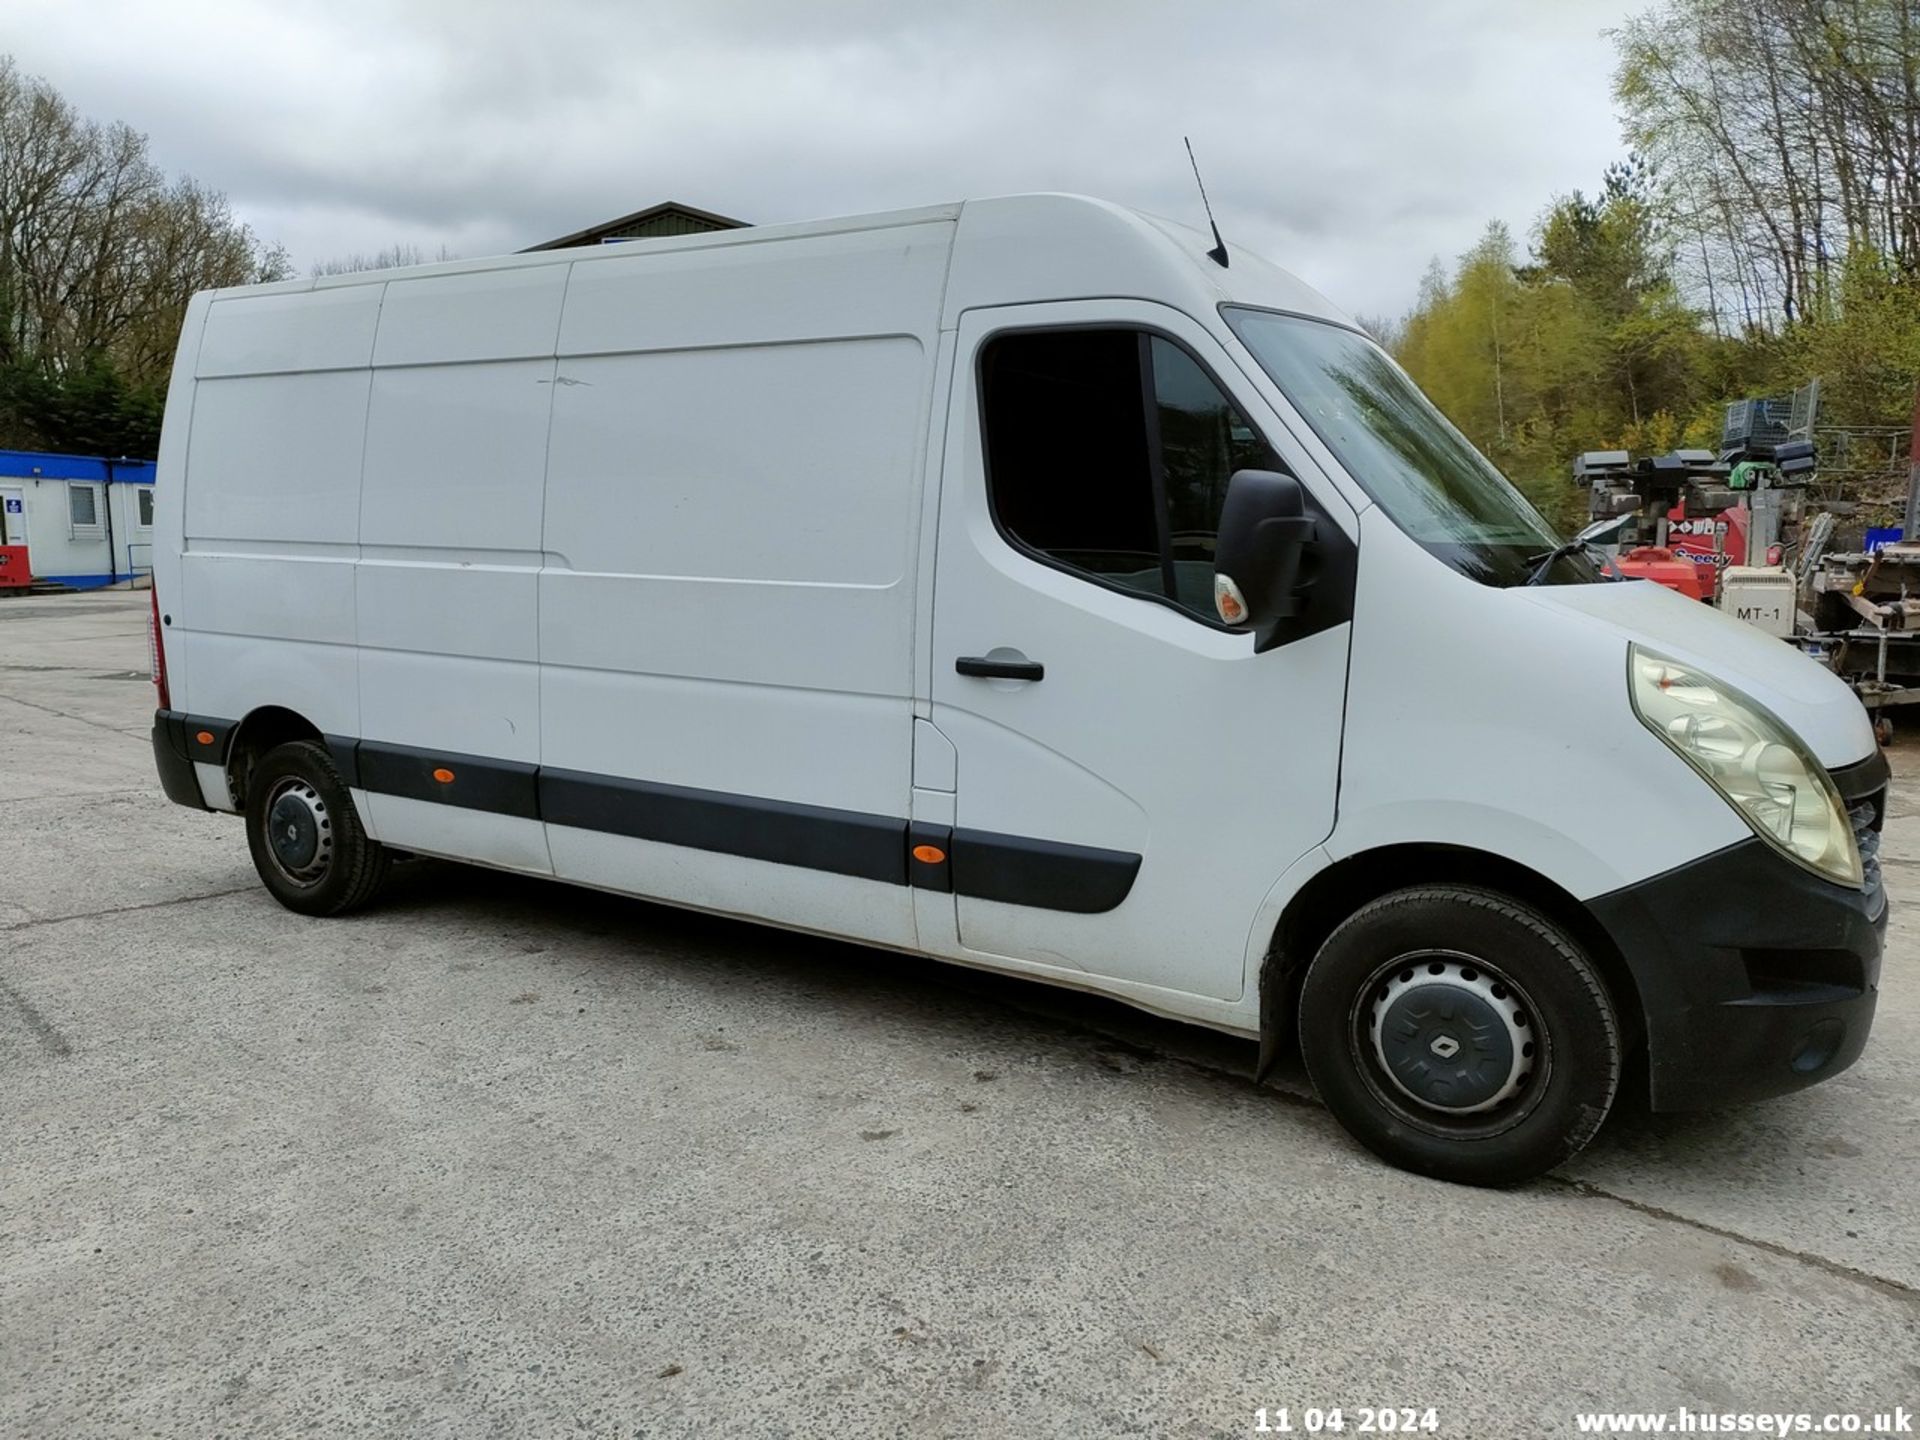 18/68 RENAULT MASTER LM35 BUSINESS DCI - 2298cc 5dr Van (White) - Image 46 of 68